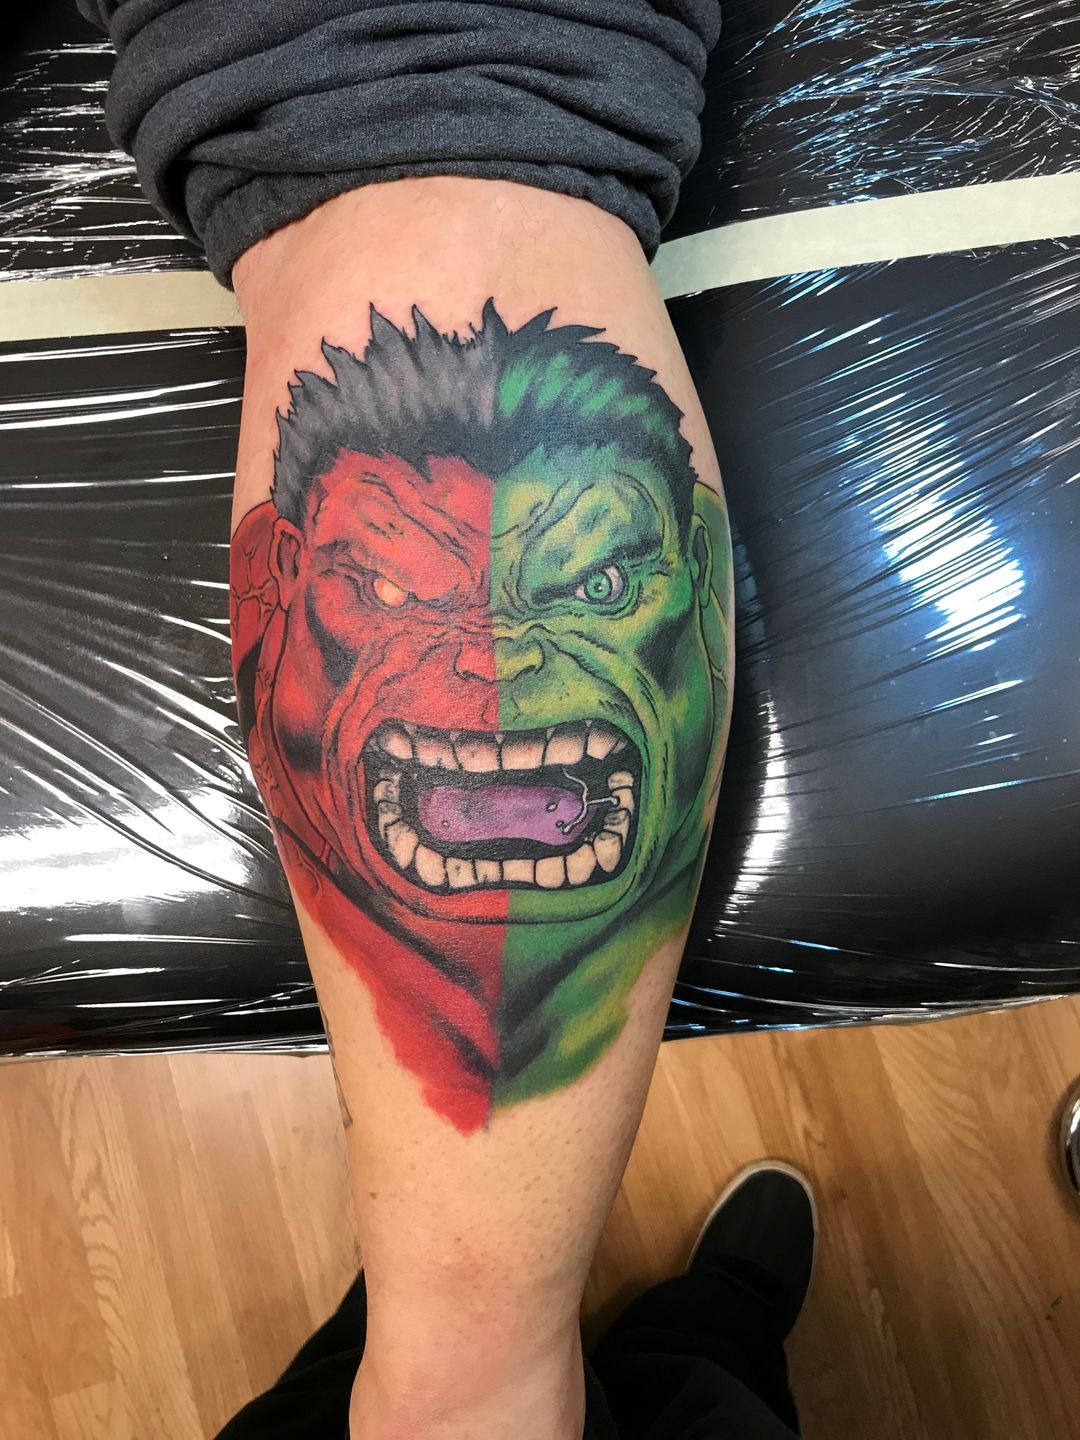 Tattoo tagged with: small, hulk, fictional character, line art, tiny,  cagridurmaz, ifttt, little, marvel, inner forearm, illustrative, film and  book | inked-app.com